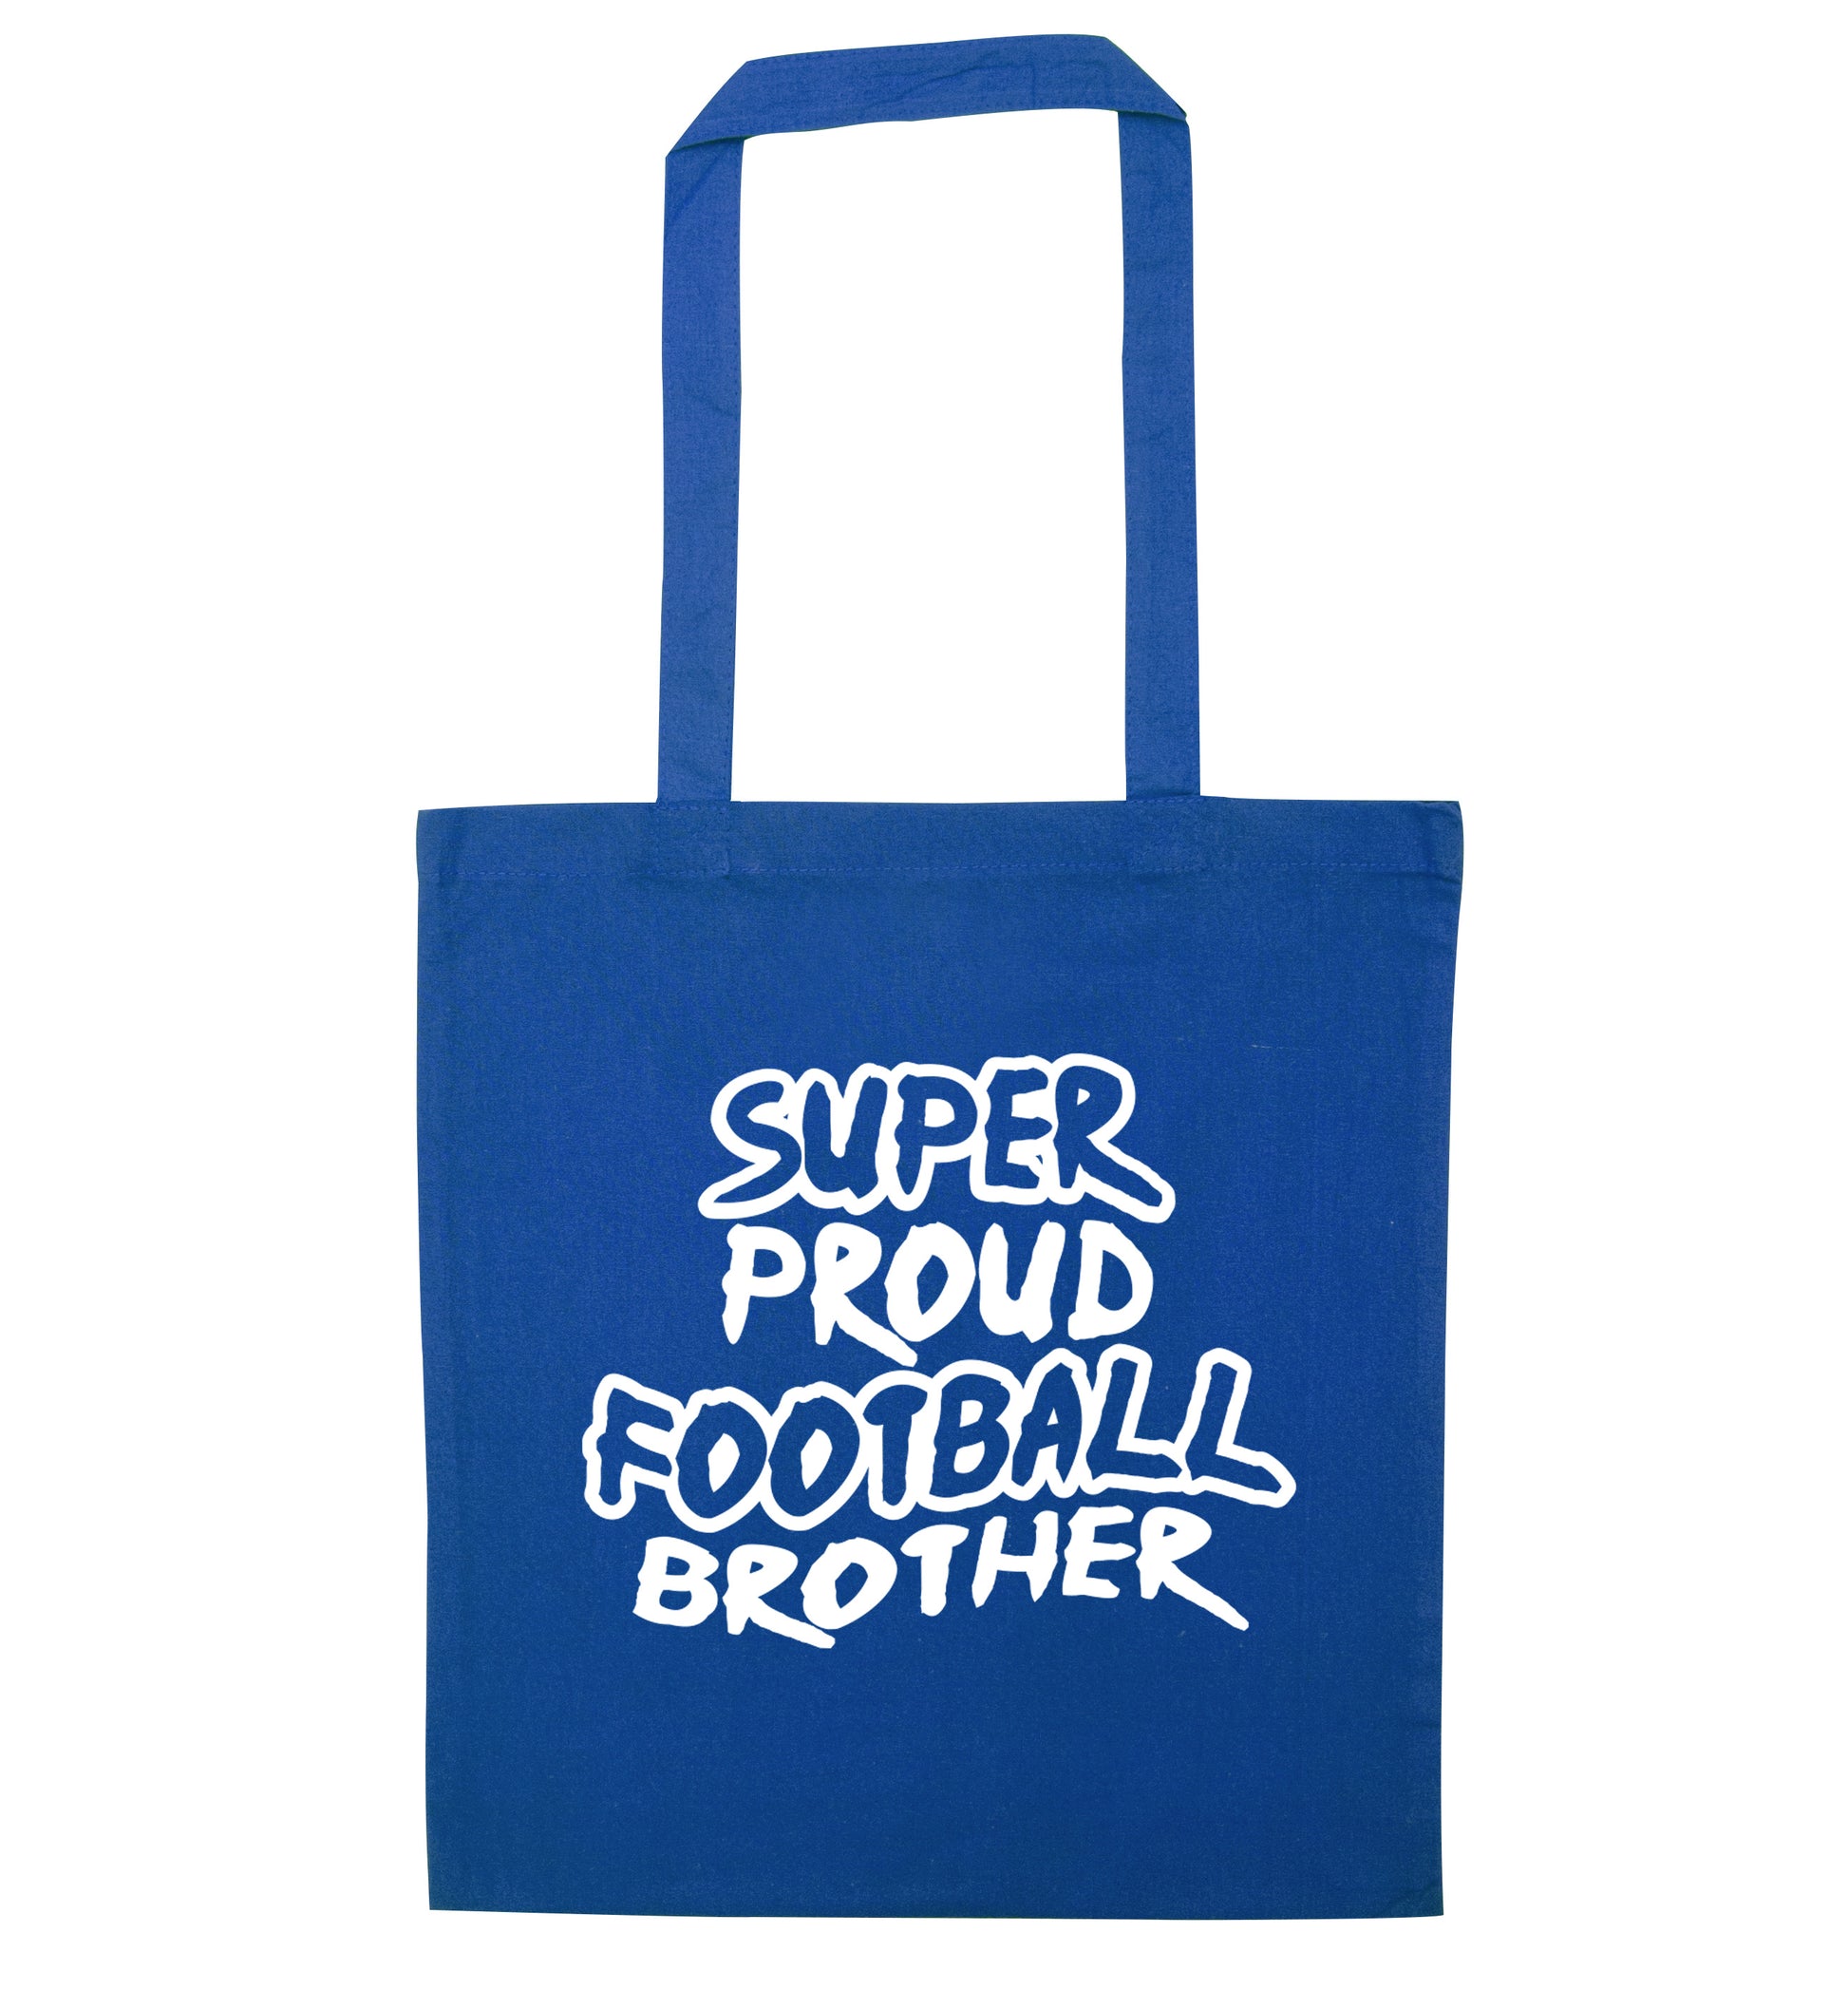 Super proud football brother blue tote bag